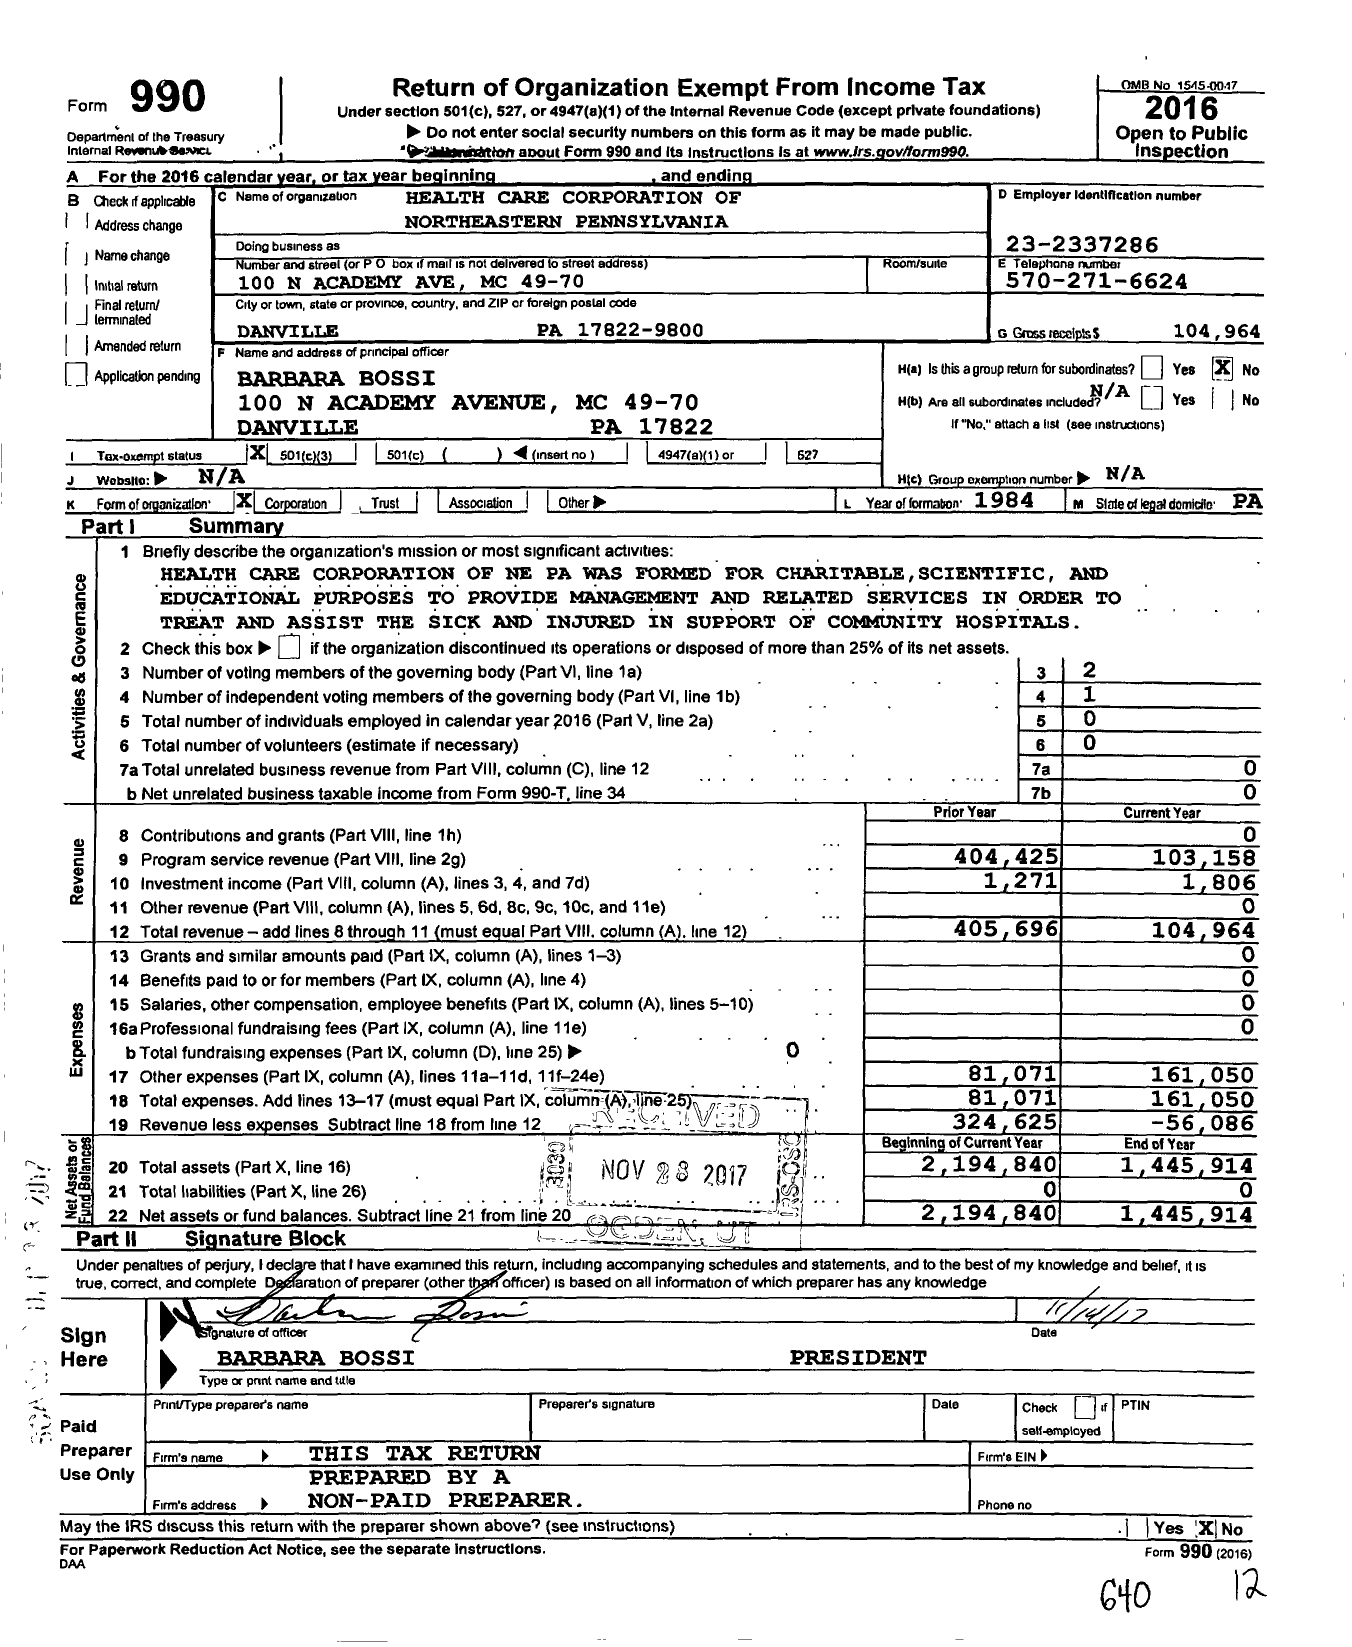 Image of first page of 2016 Form 990 for Health Care Corporation of Northeastern Pennsylvania